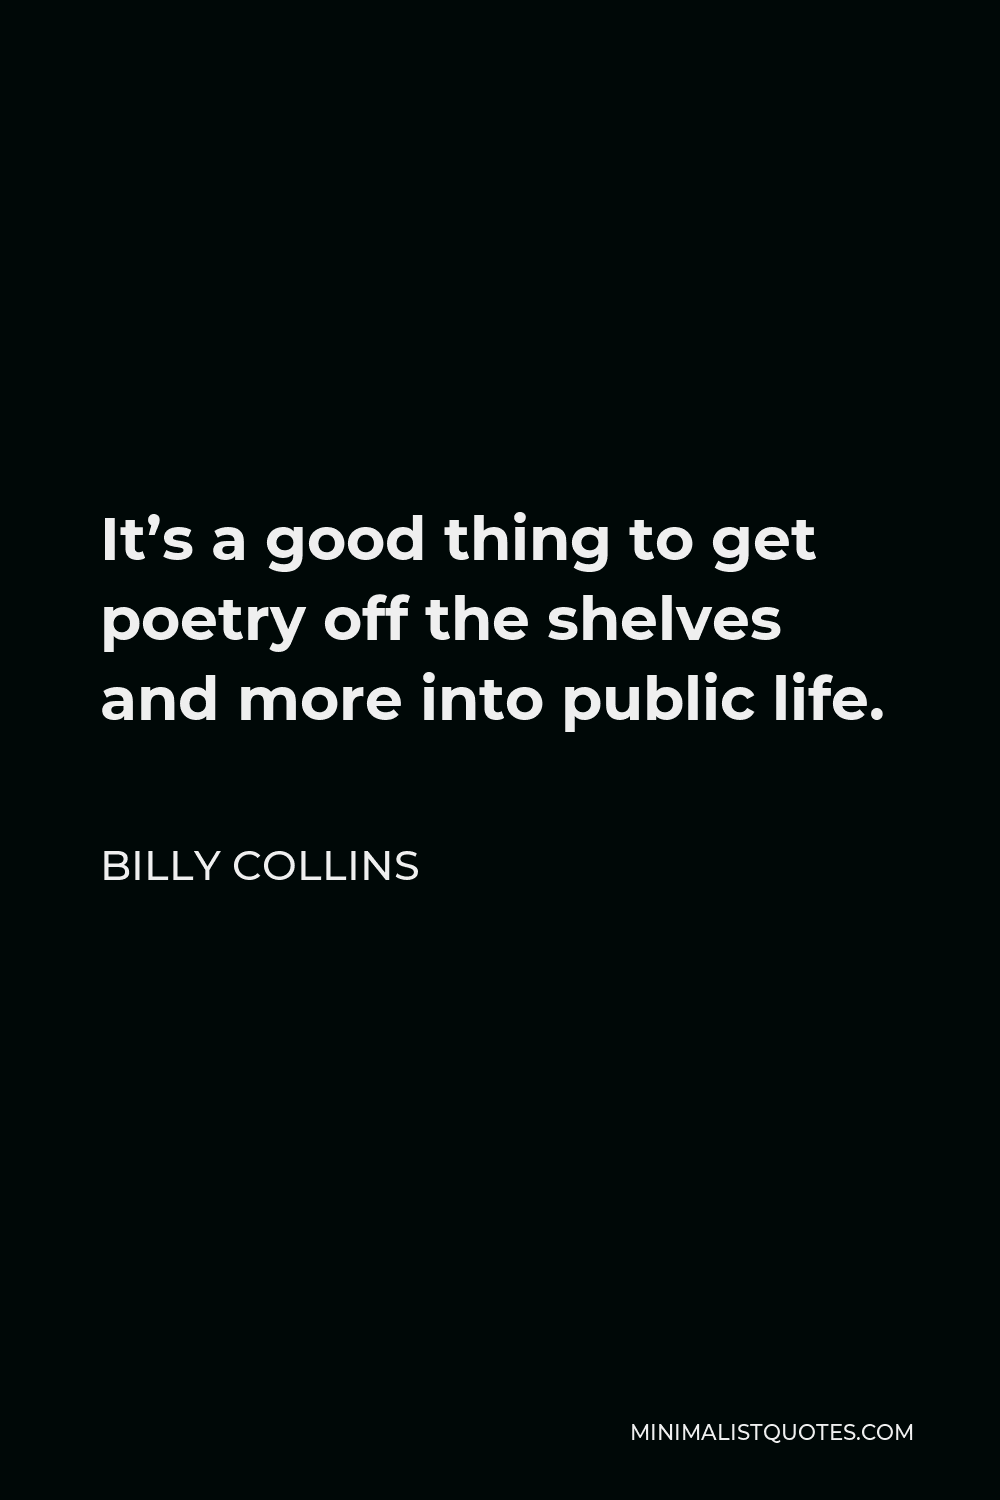 Billy Collins Quote - It’s a good thing to get poetry off the shelves and more into public life.